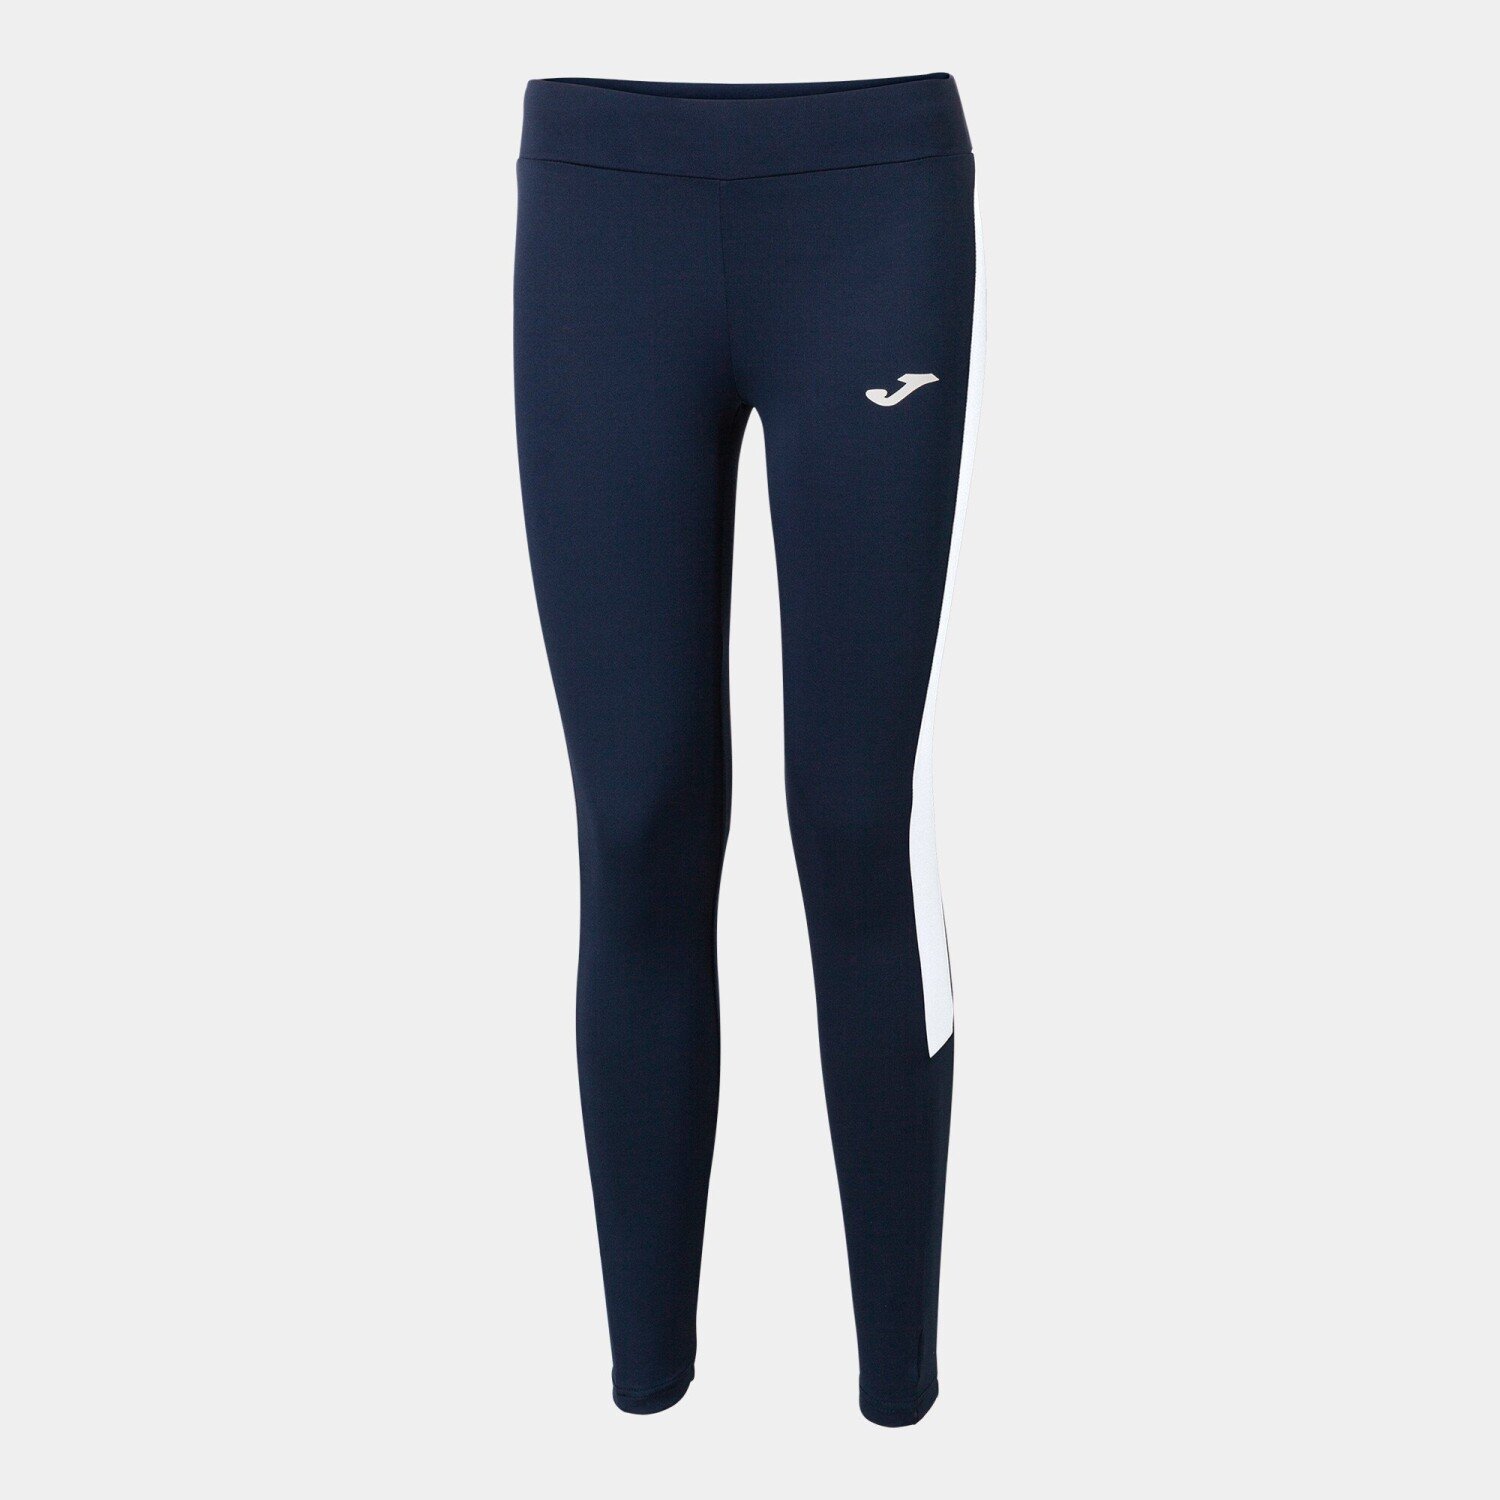 https://www.totalfootballdirect.com/Cache/Images/Joma-Eco-Championship-Womens-Leggings-Navy-White-opaque-1500x1500.jpg